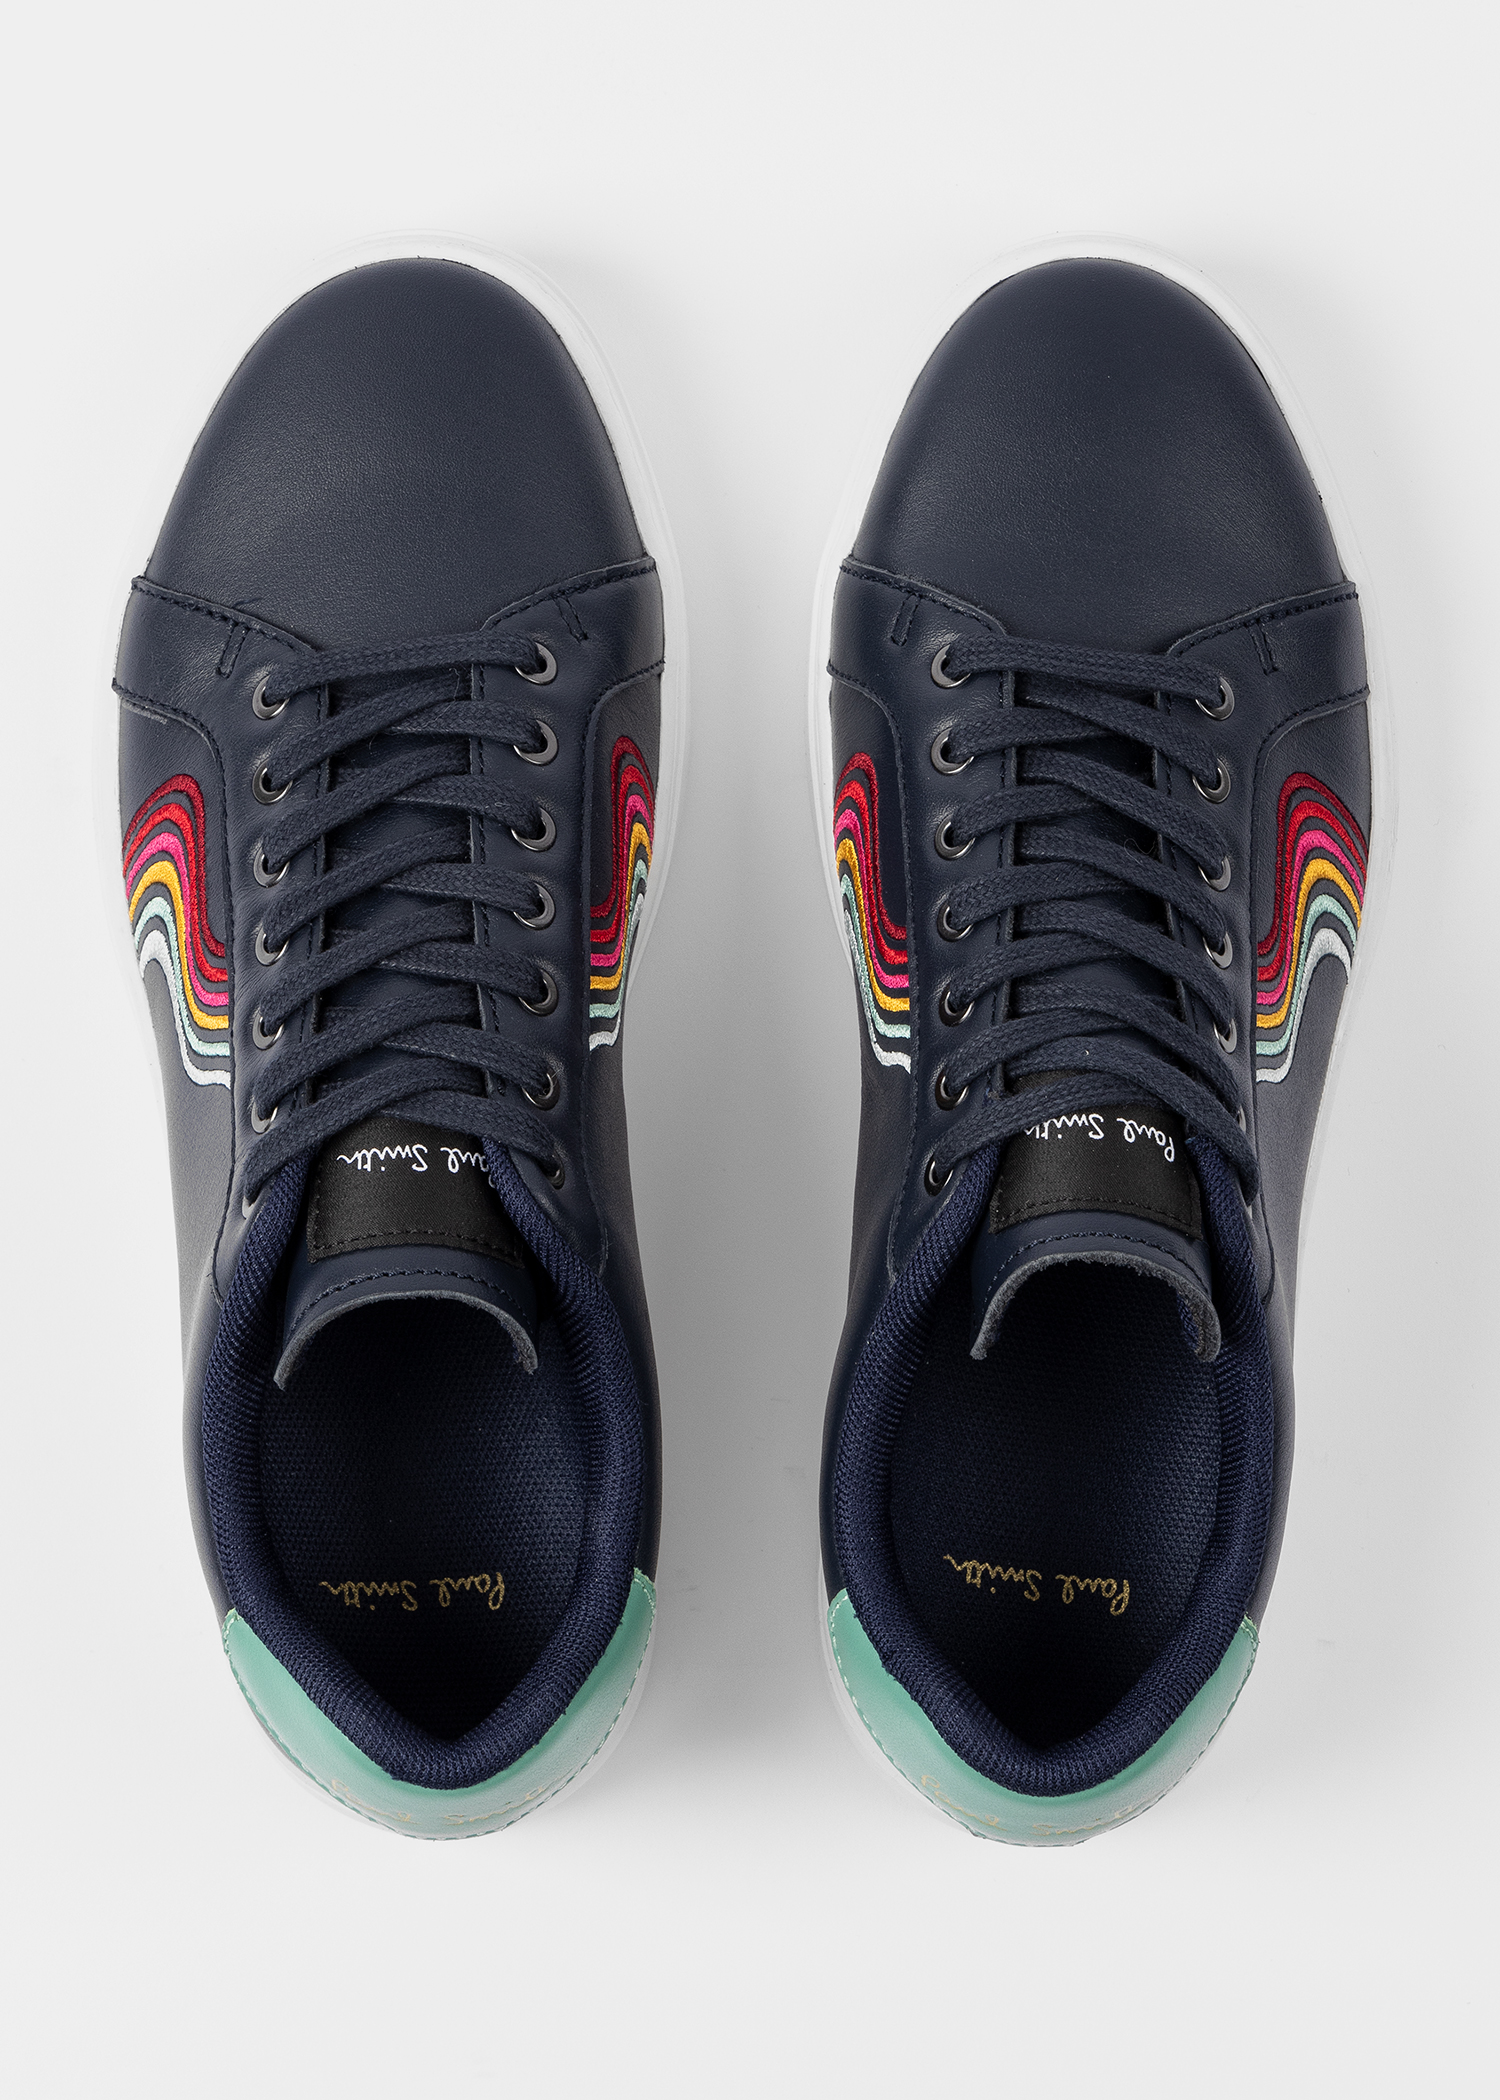 Designer Trainers for Women | Paul Smith